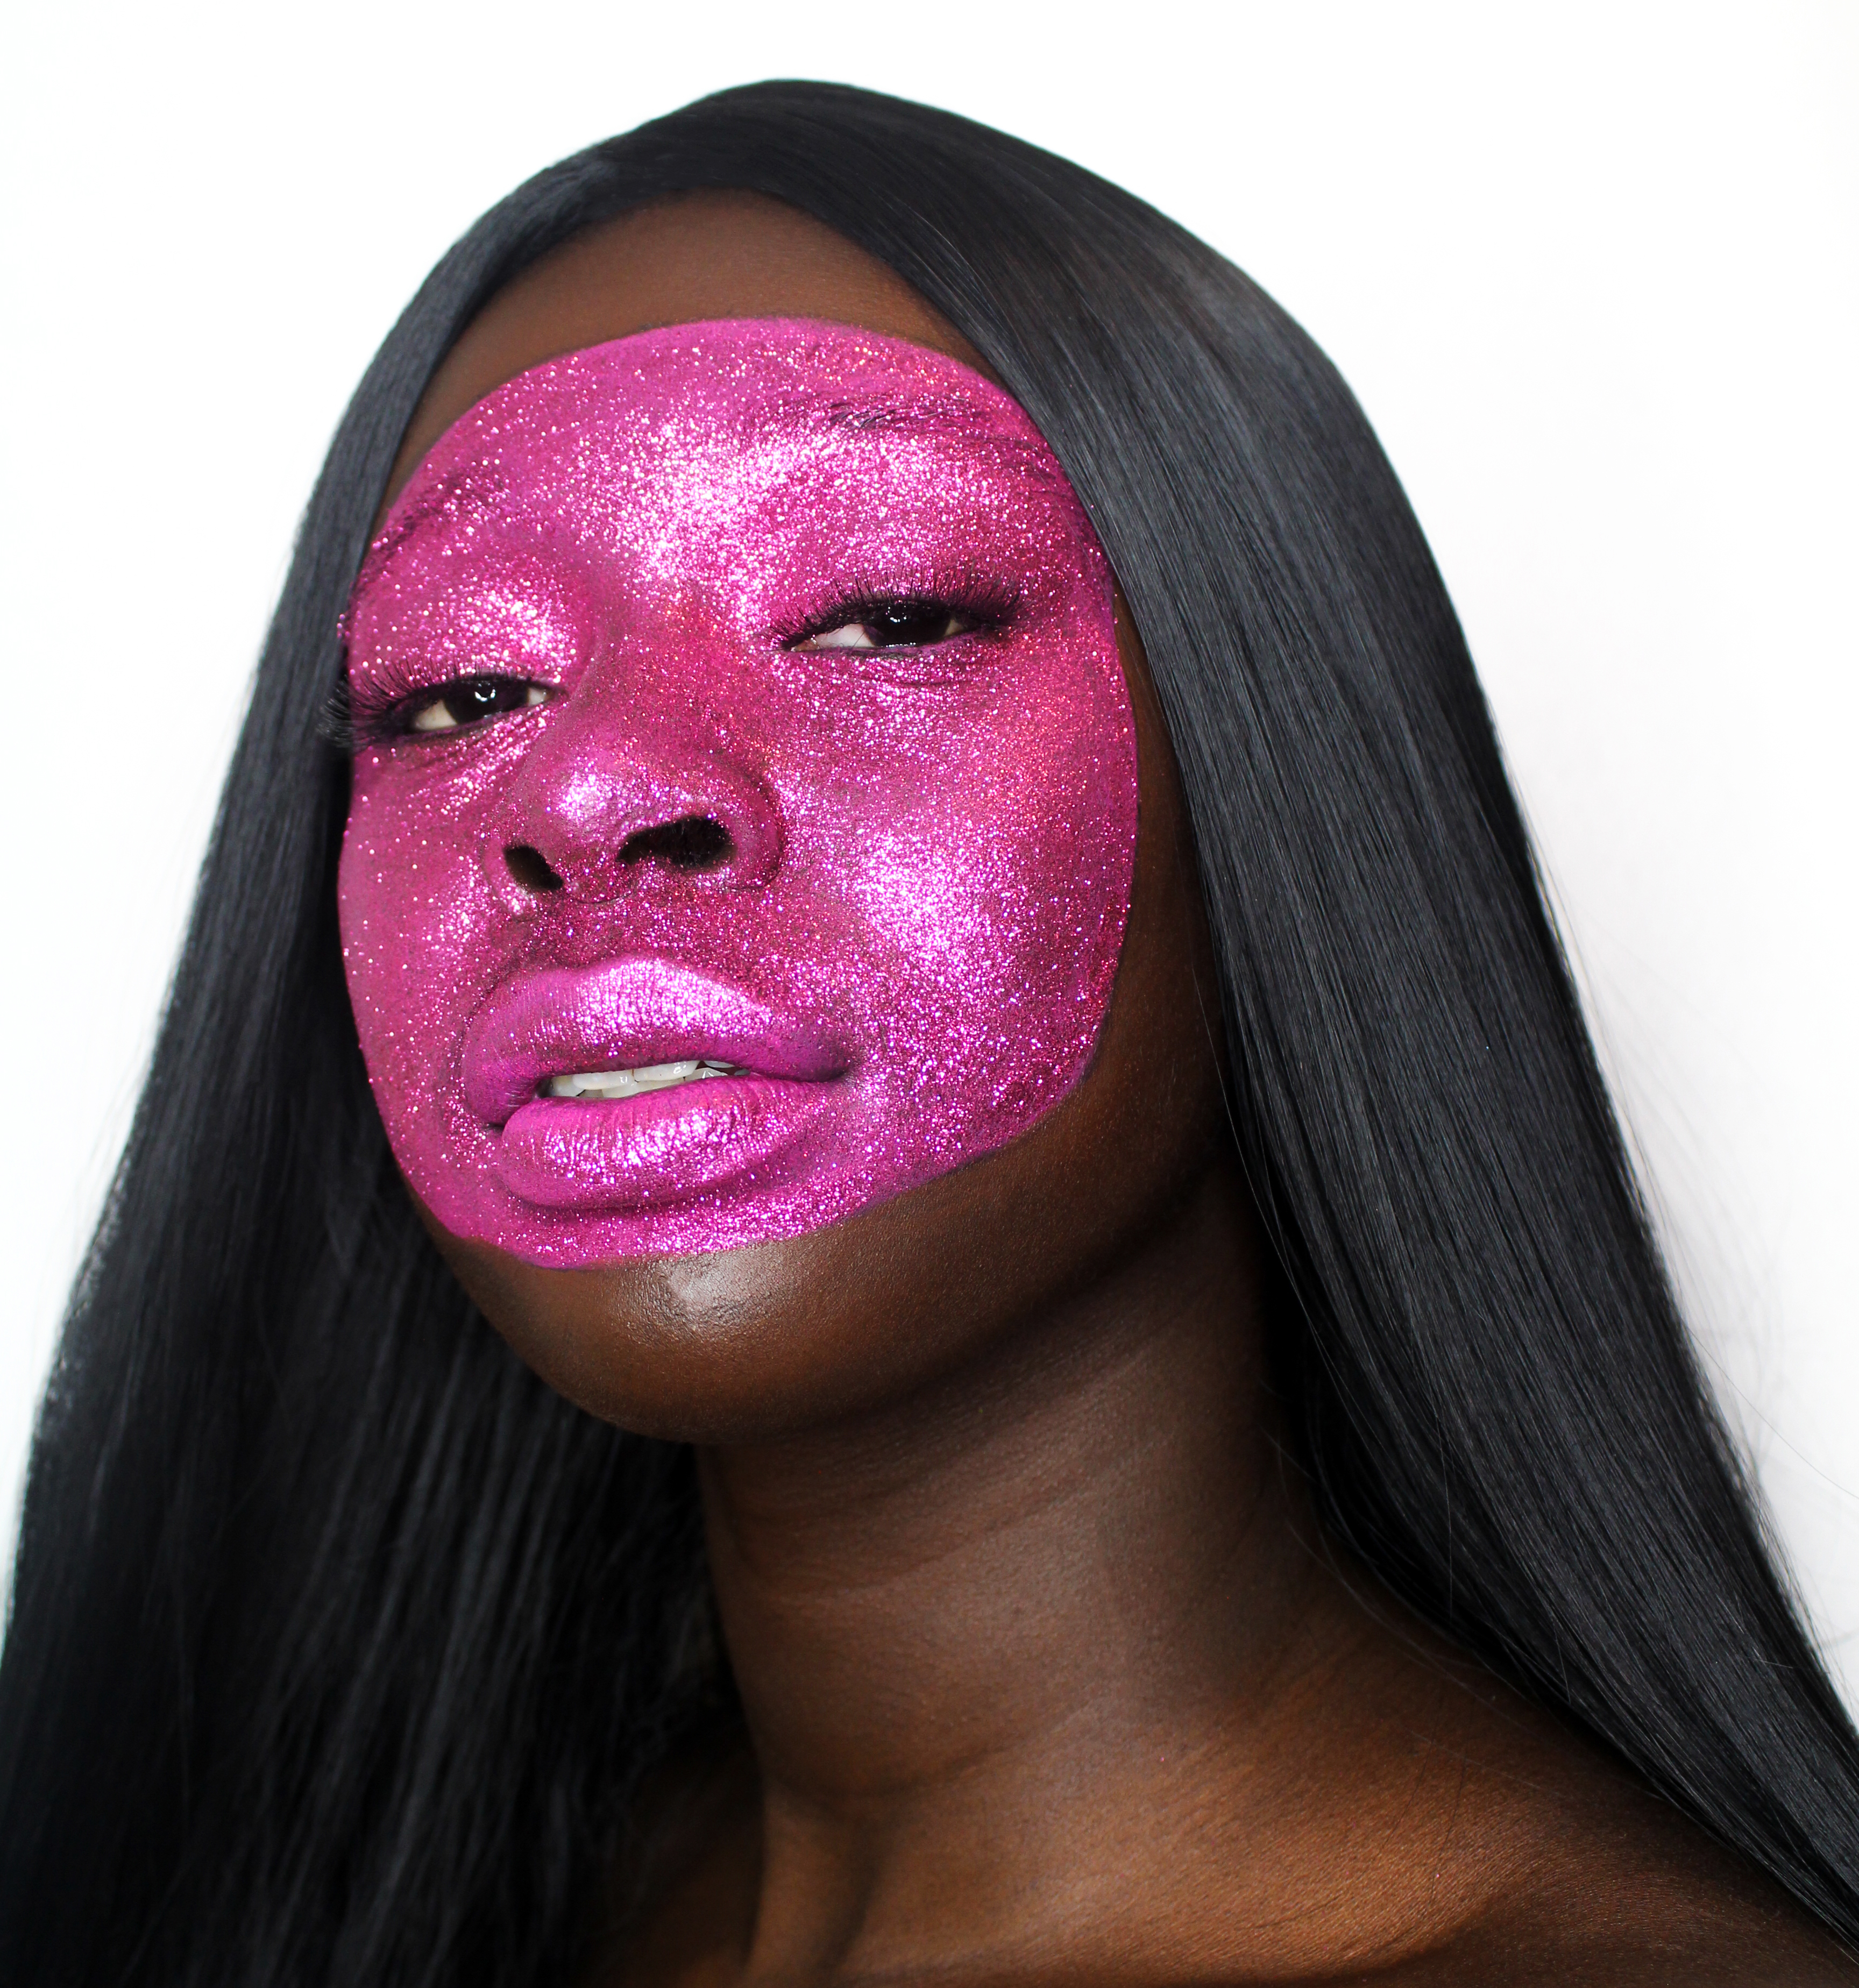 Wendy Asumadu (@wendysworld_xox): The Makeup artist using her Ghanaian heritage to inspire her abstract looks